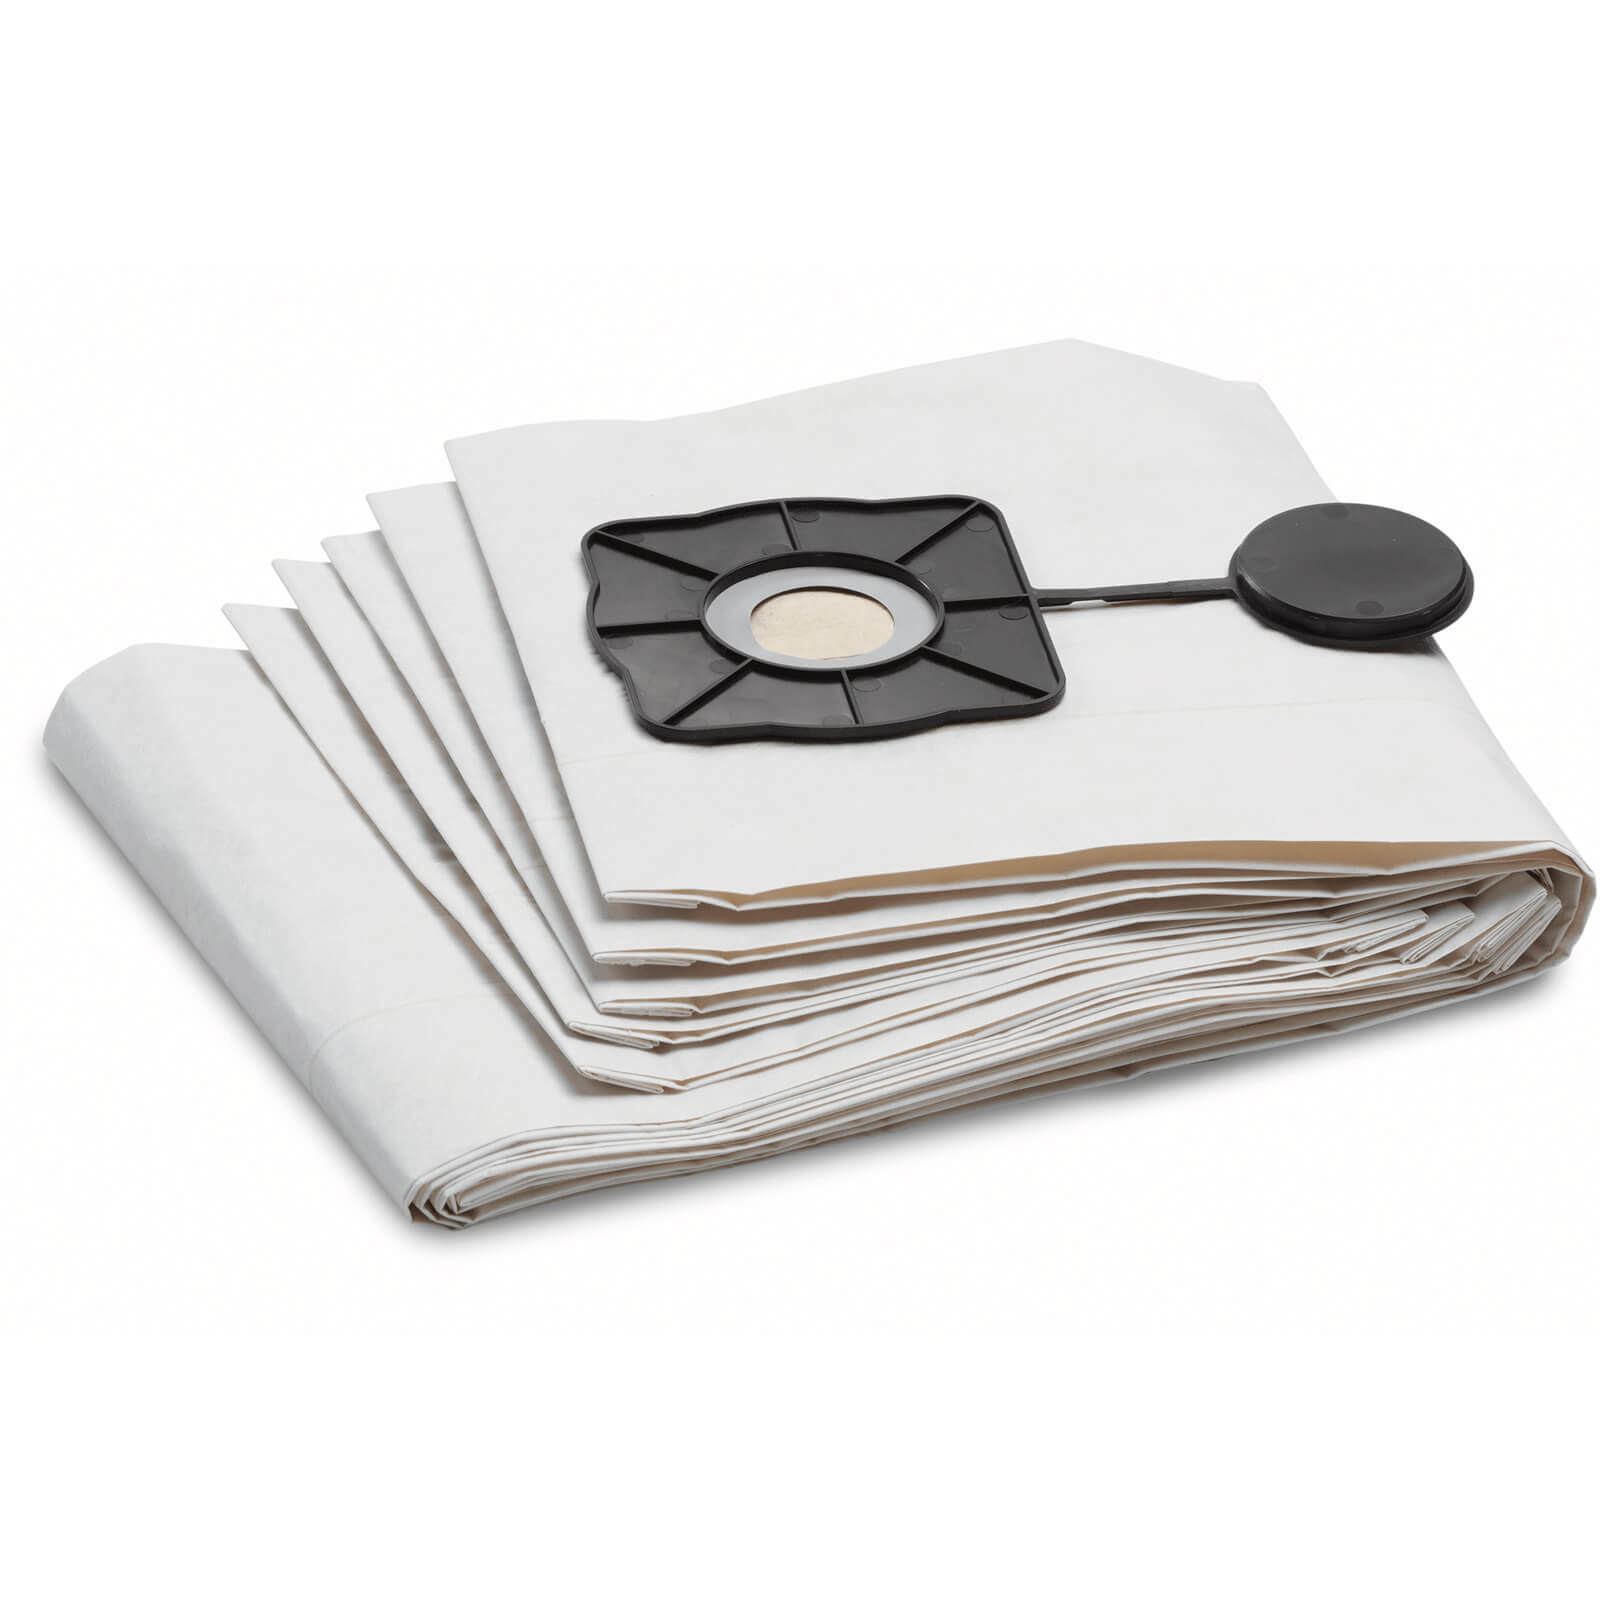 Image of Karcher Class L Wet Filter Dust Bags for NT 65/2 and NT 70/2 Vacuum Cleaners Pack of 5